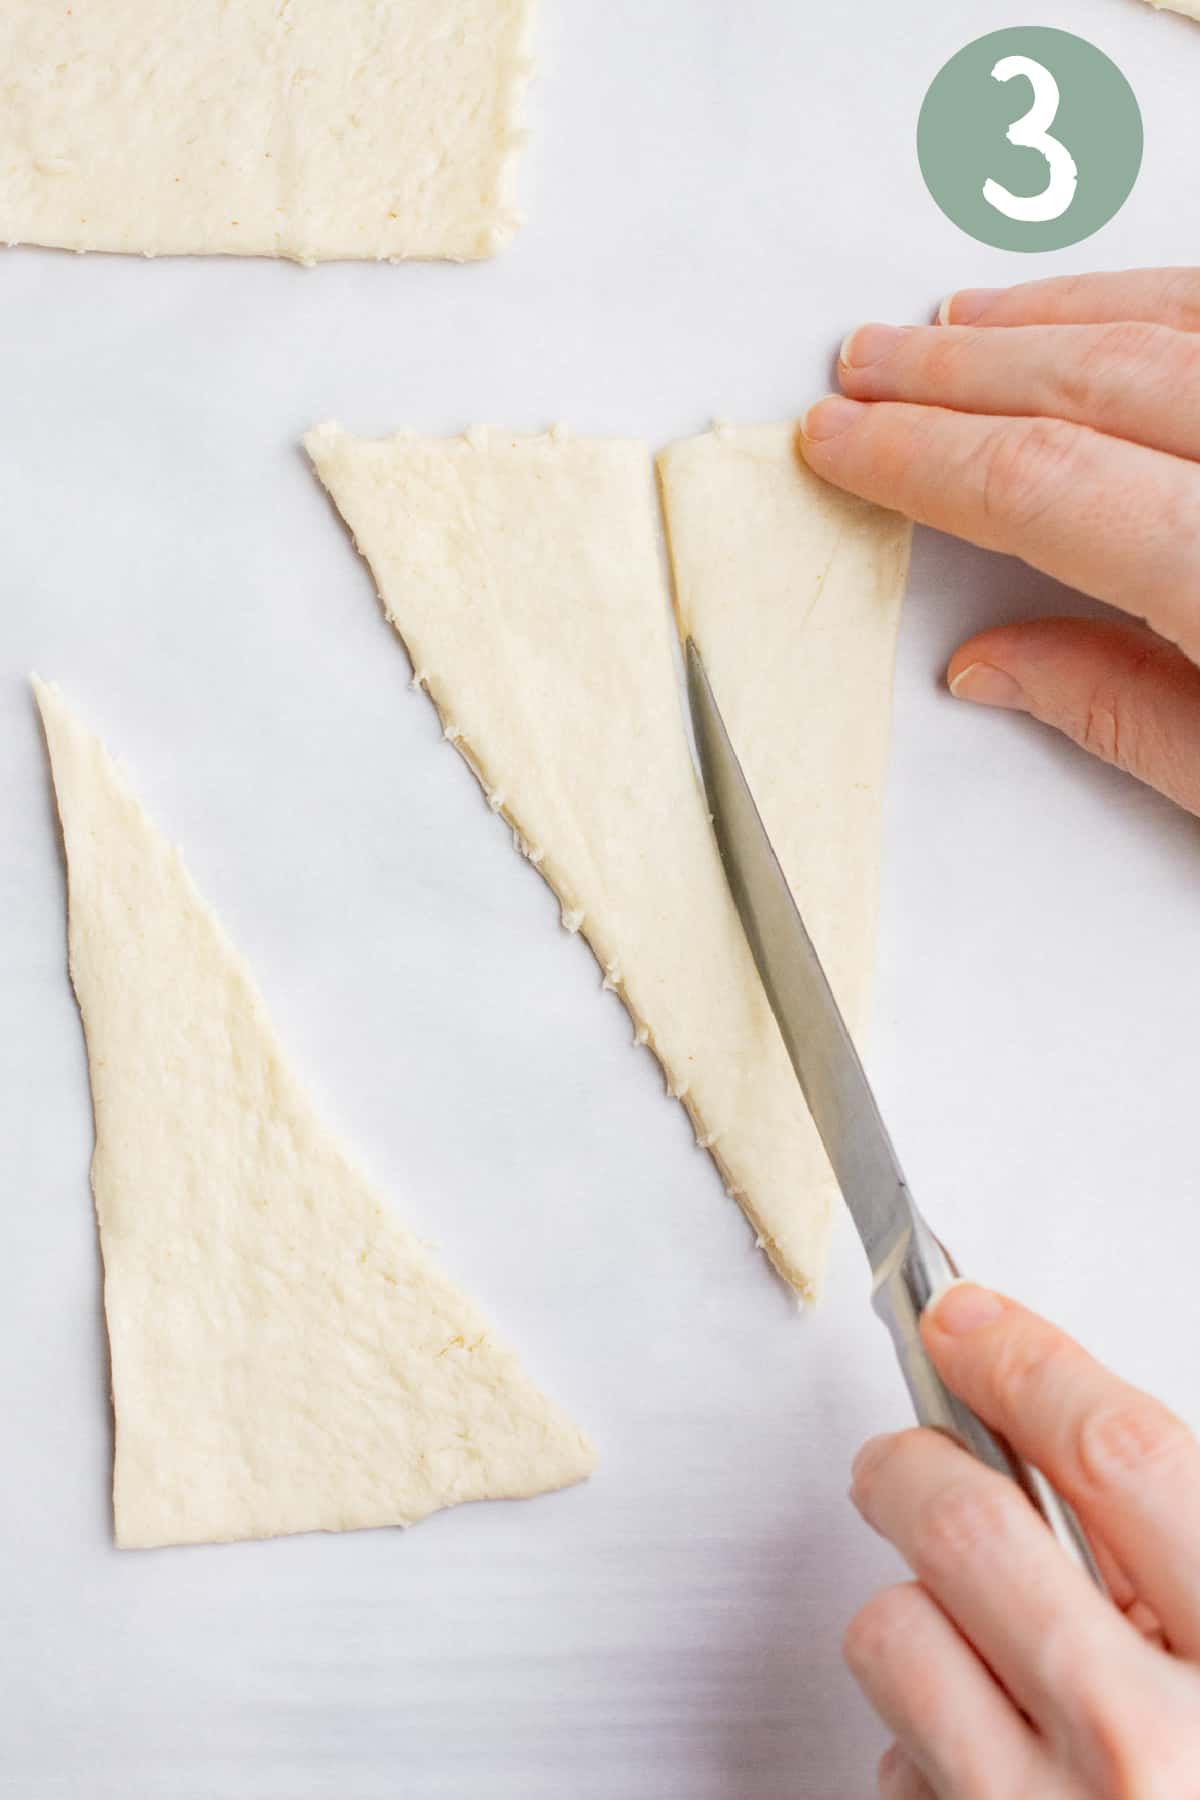 A hand holding a knife cutting a crescent roll triangle dough in half lengthwise. 